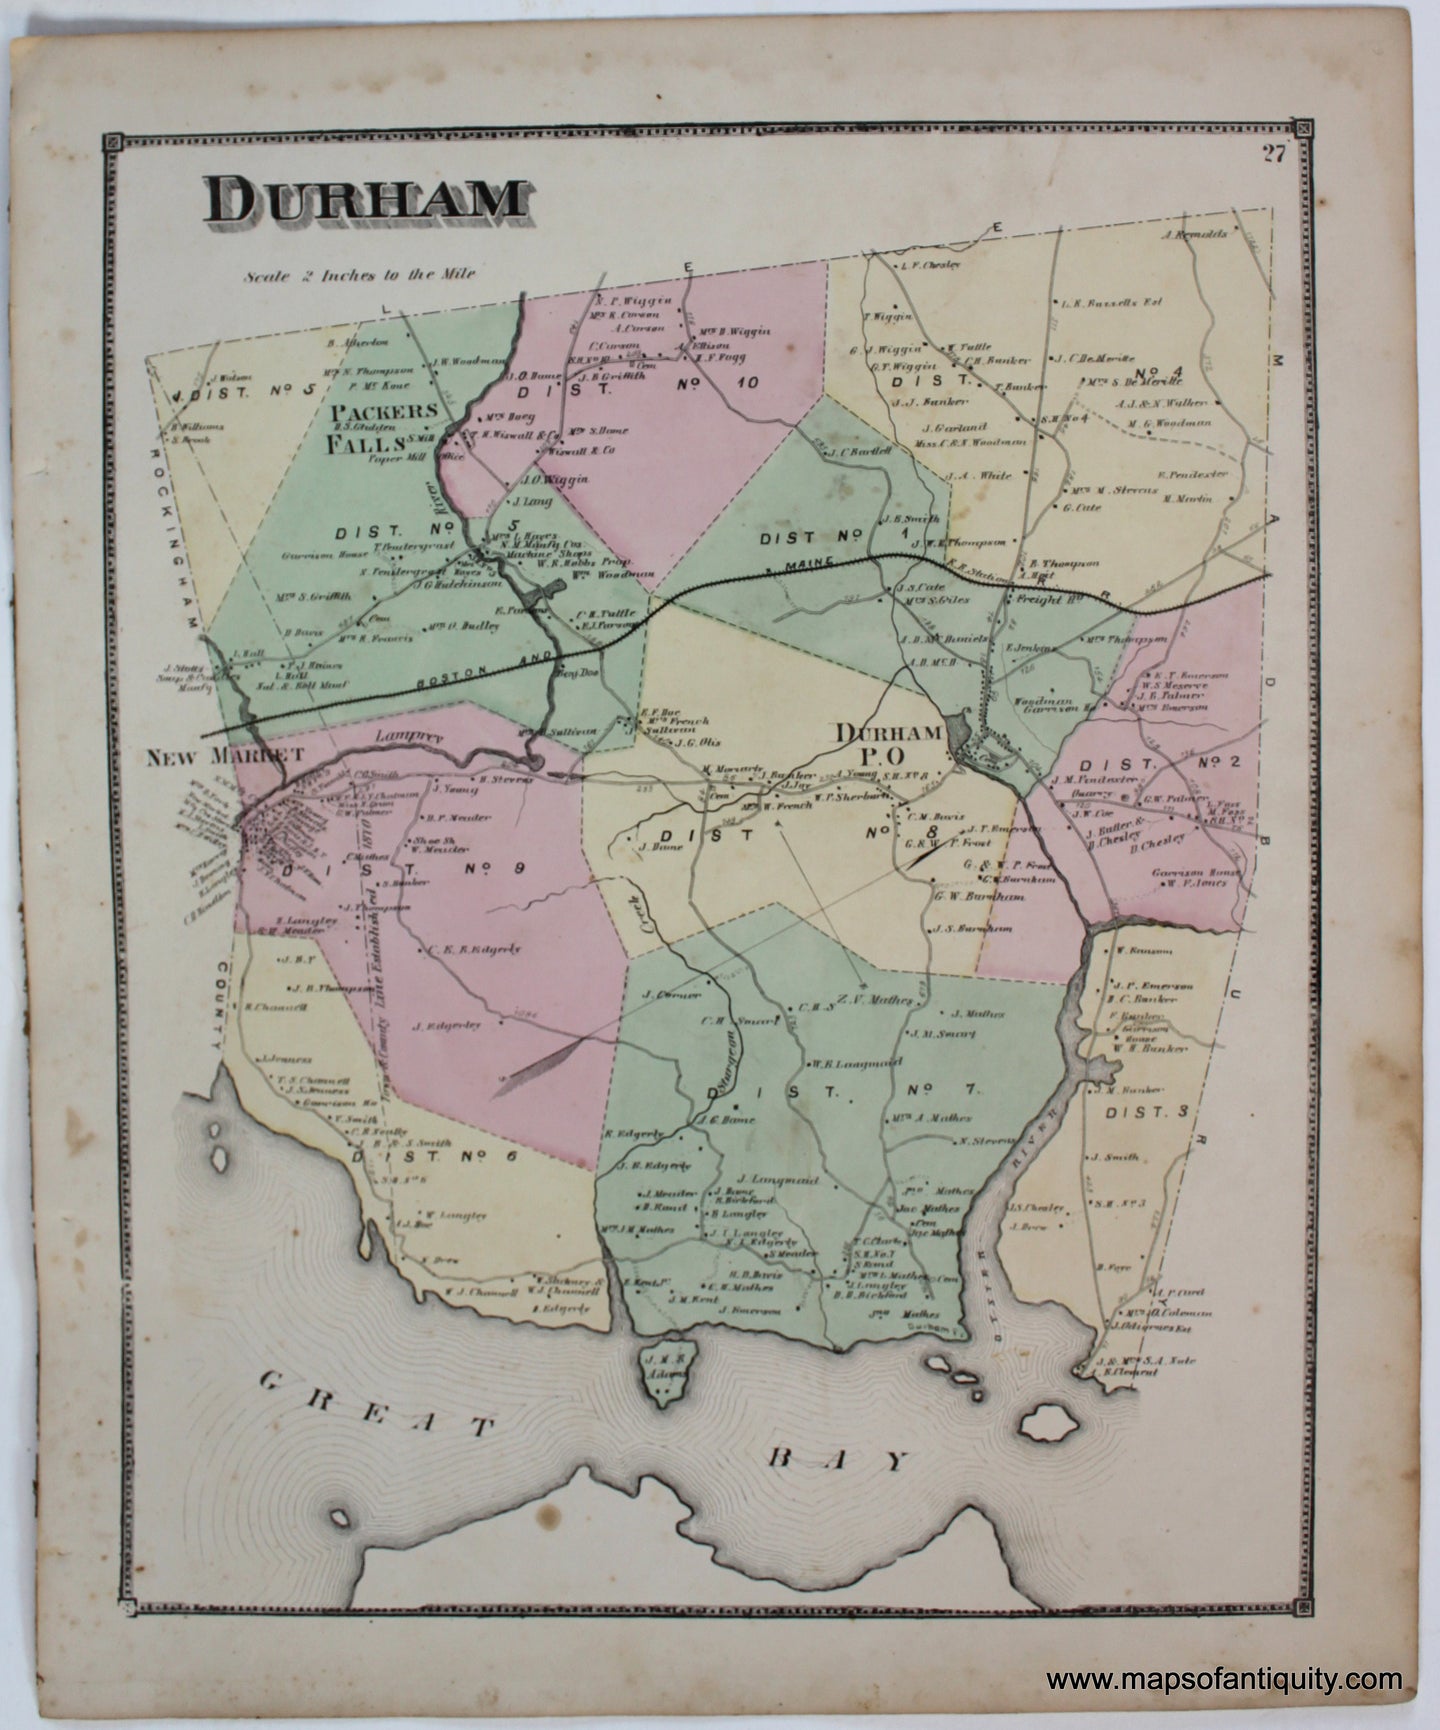 Antique-Map-Durham-Strafford-County-Town-Towns-New-Hampshire-NH-Sanford-Everts-1871-1870s-1800s-Mid-Late-19th-Century-Maps-of-Antiquity